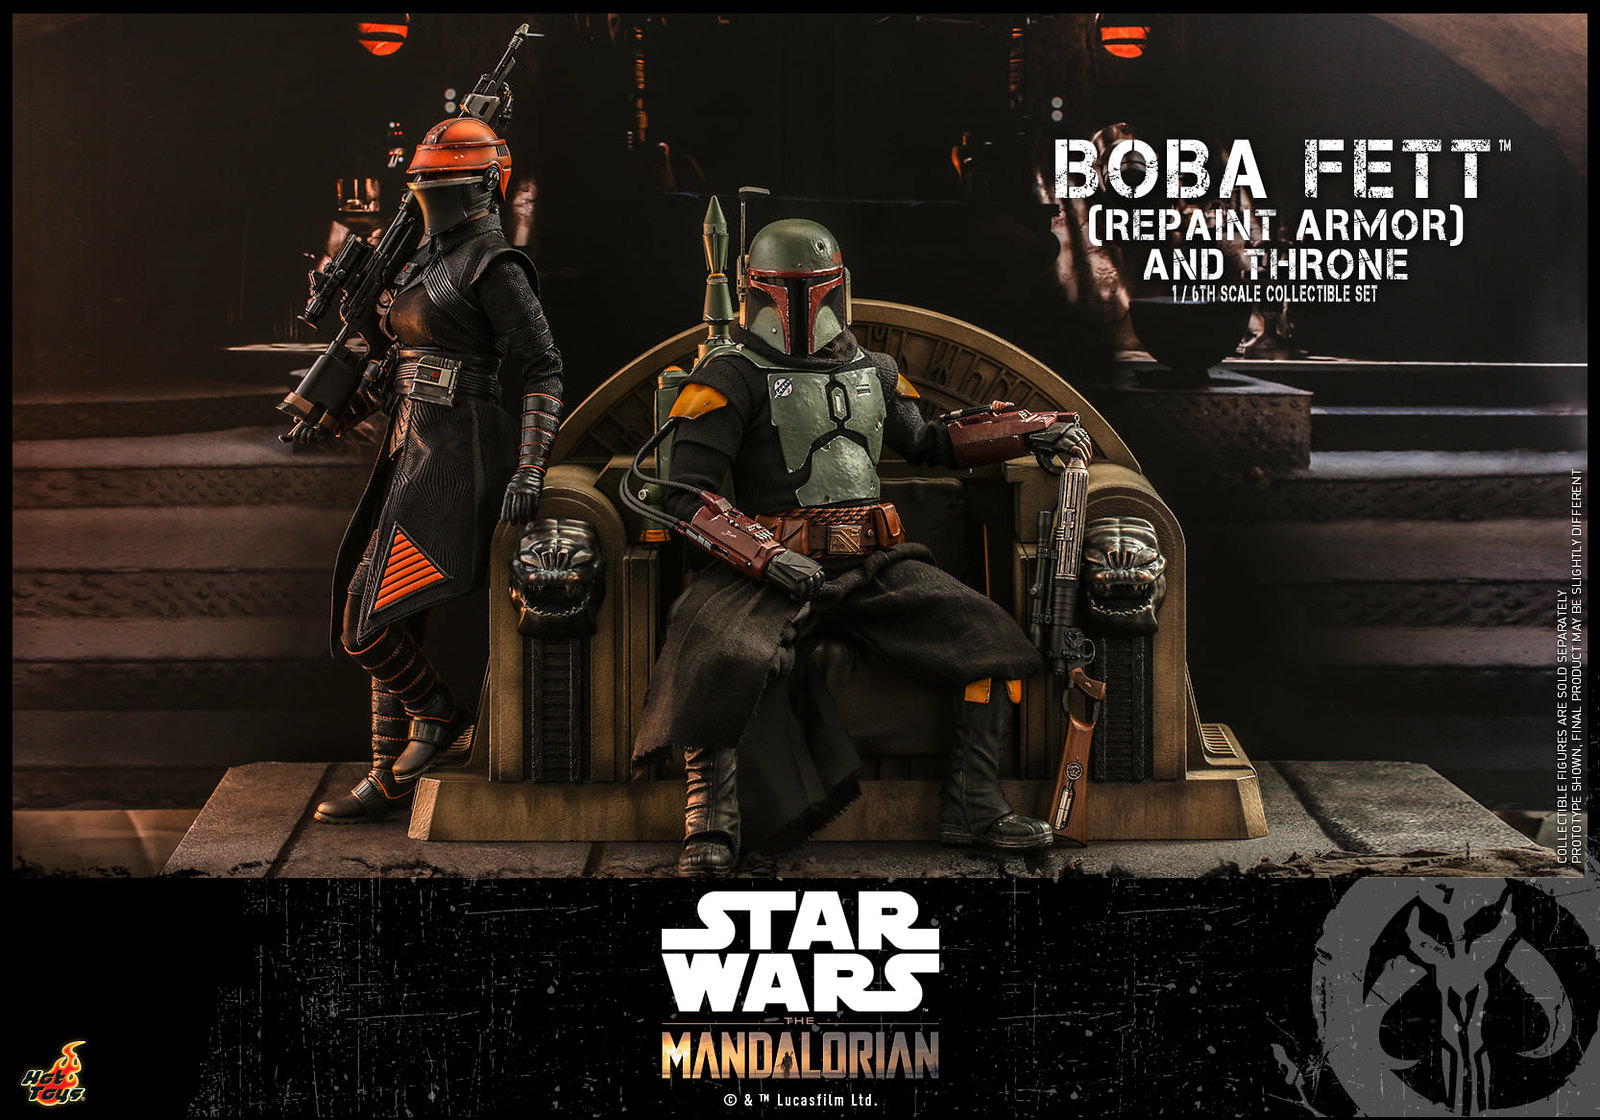 Star Wars: The Mandalorian™ - 1/6th scale Boba Fett™ (Repaint Armor) Collectible figure/ figure and Throne Collectible Set 51311297046_753224dac8_h